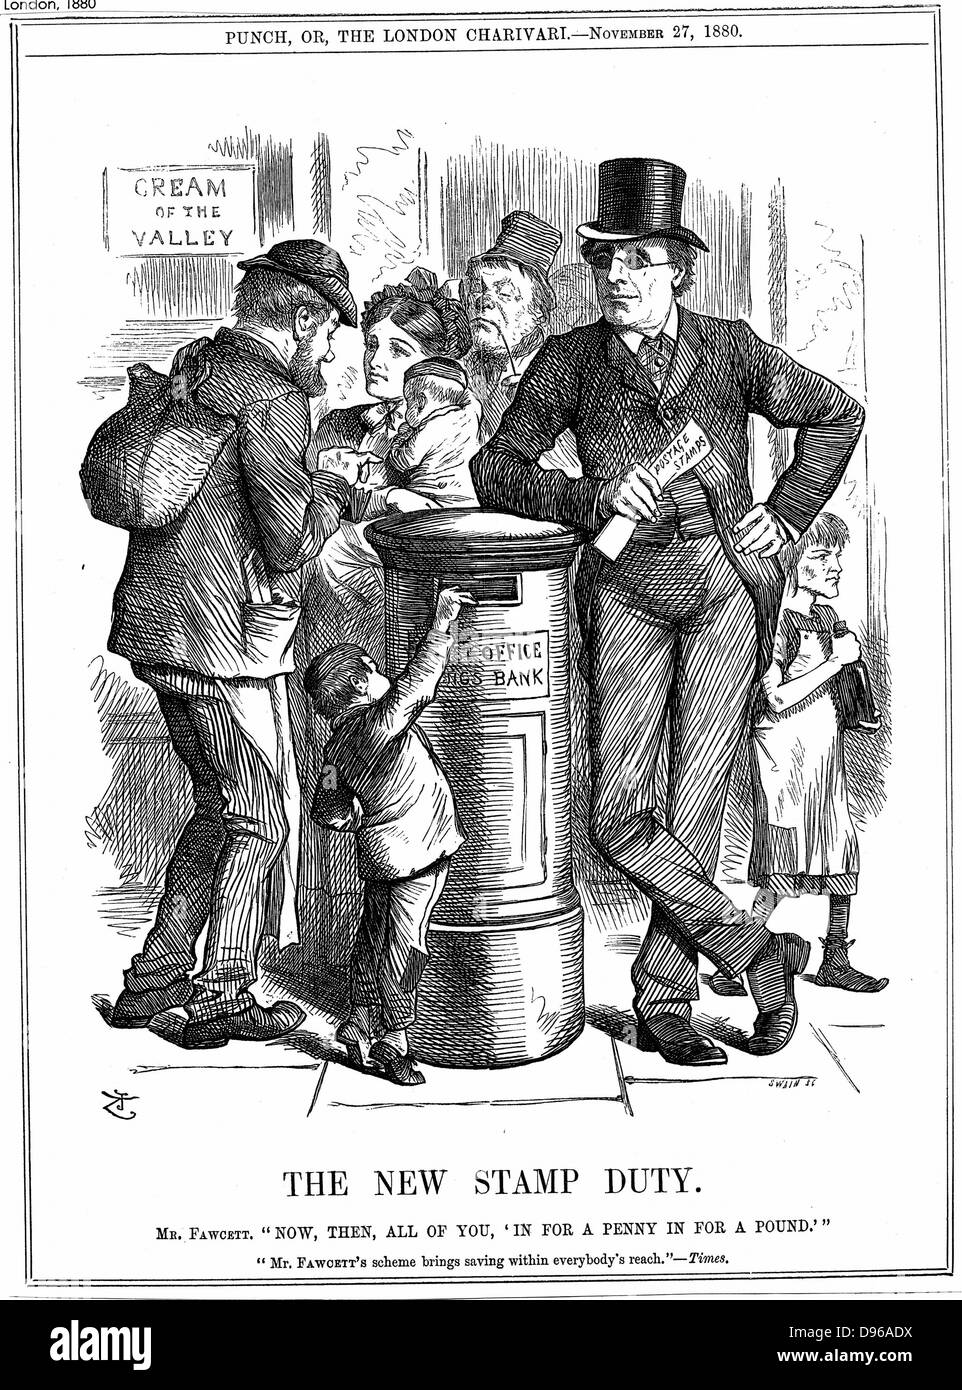 John Tenniel's cartoon concerning the Postmater General, Henry Fawcett's introduction of the Post Office Savings Bank penny stamp savings scheme. From 'Punch', London, 1880 Stock Photo